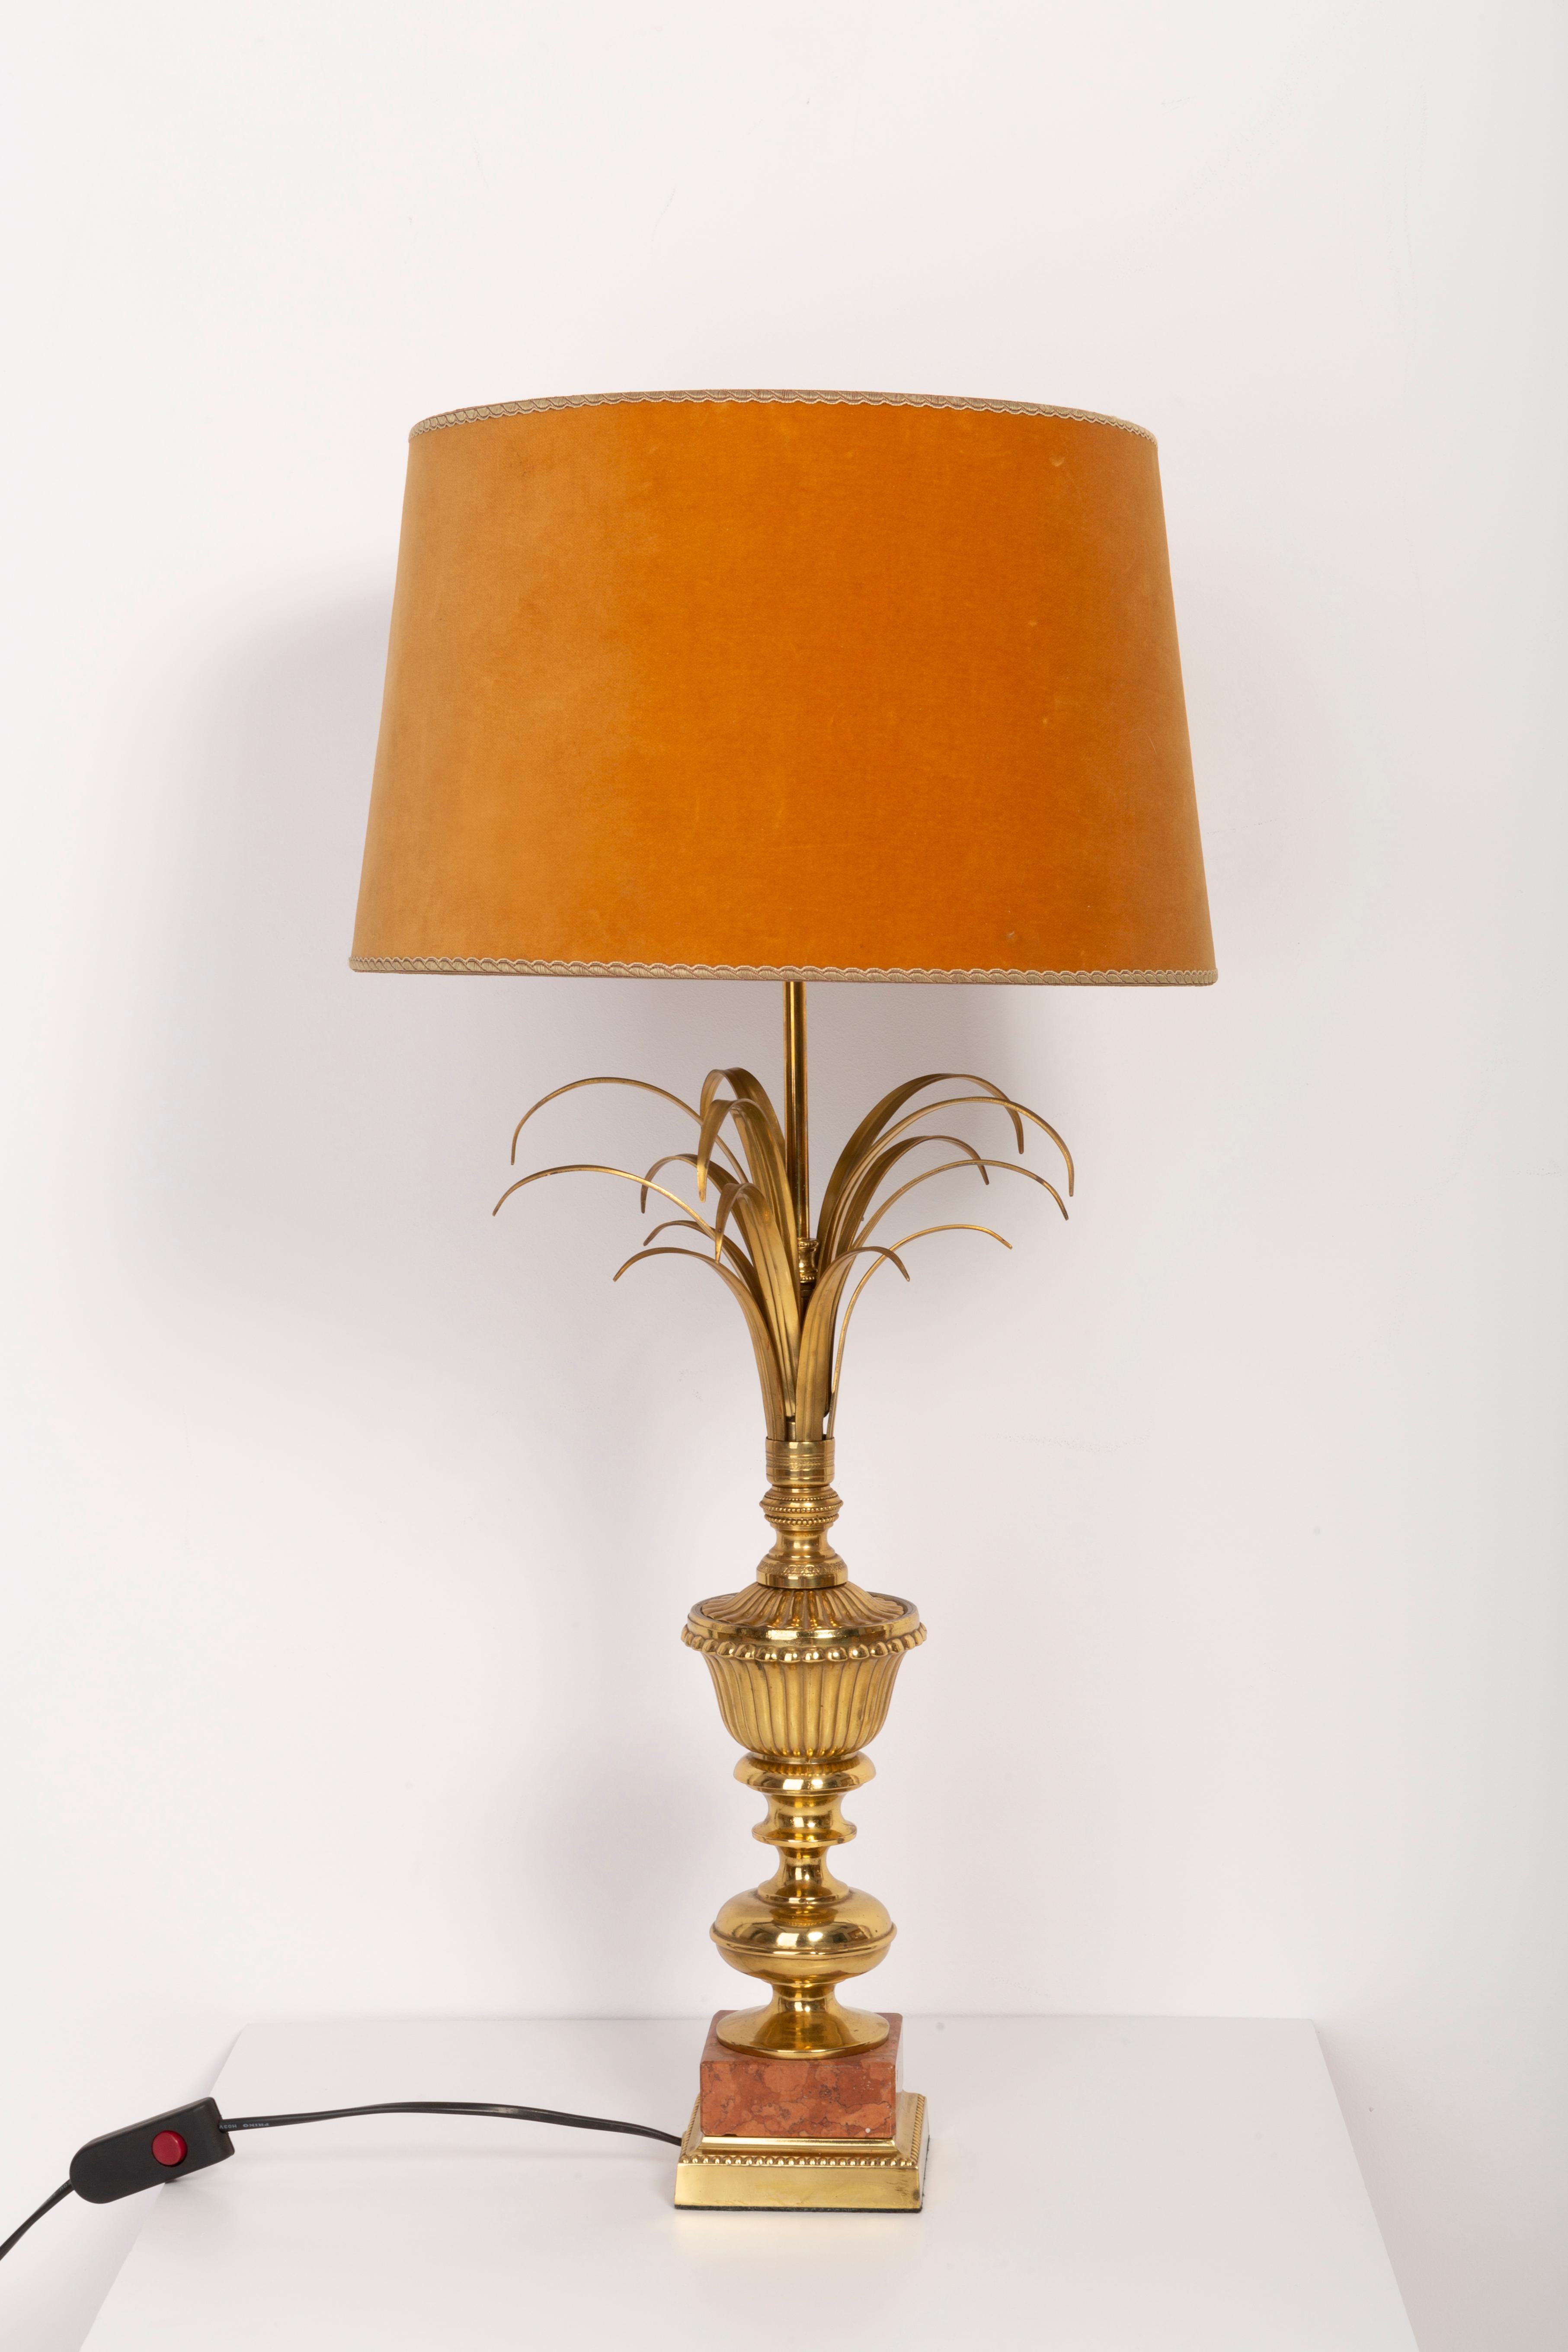 Midcentury table lamp designed in France during the 1960s. Gold elements, orange velvet on the top.. Very good original vintage condition. Standard bulbs. Only one unique piece.